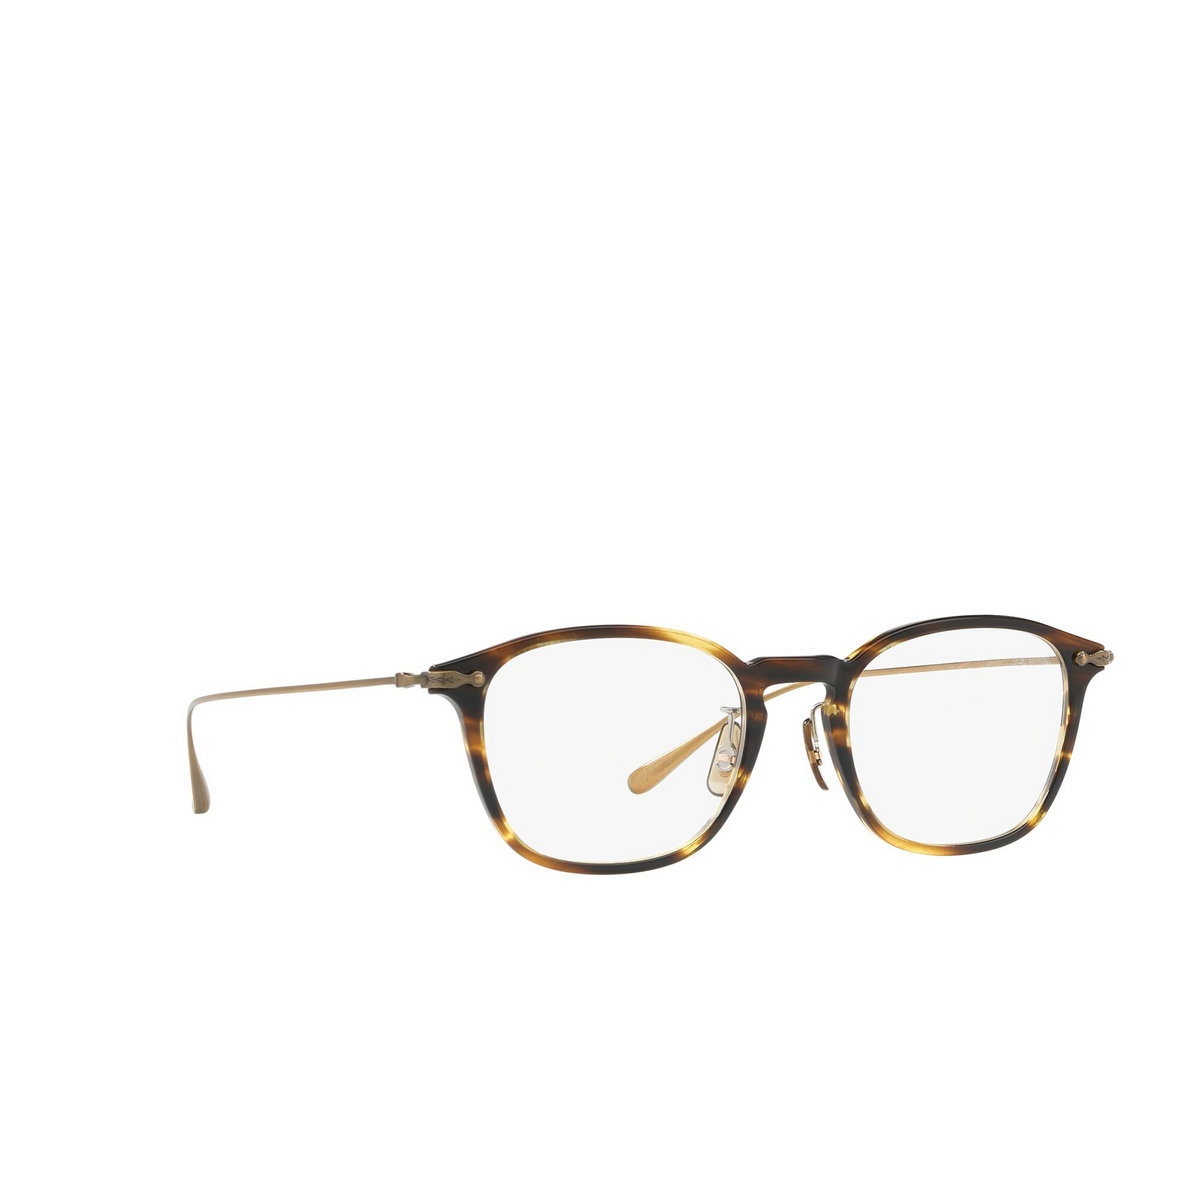 Oliver Peoples WINNET Eyeglasses 1003 Cocobolo - three-quarters view